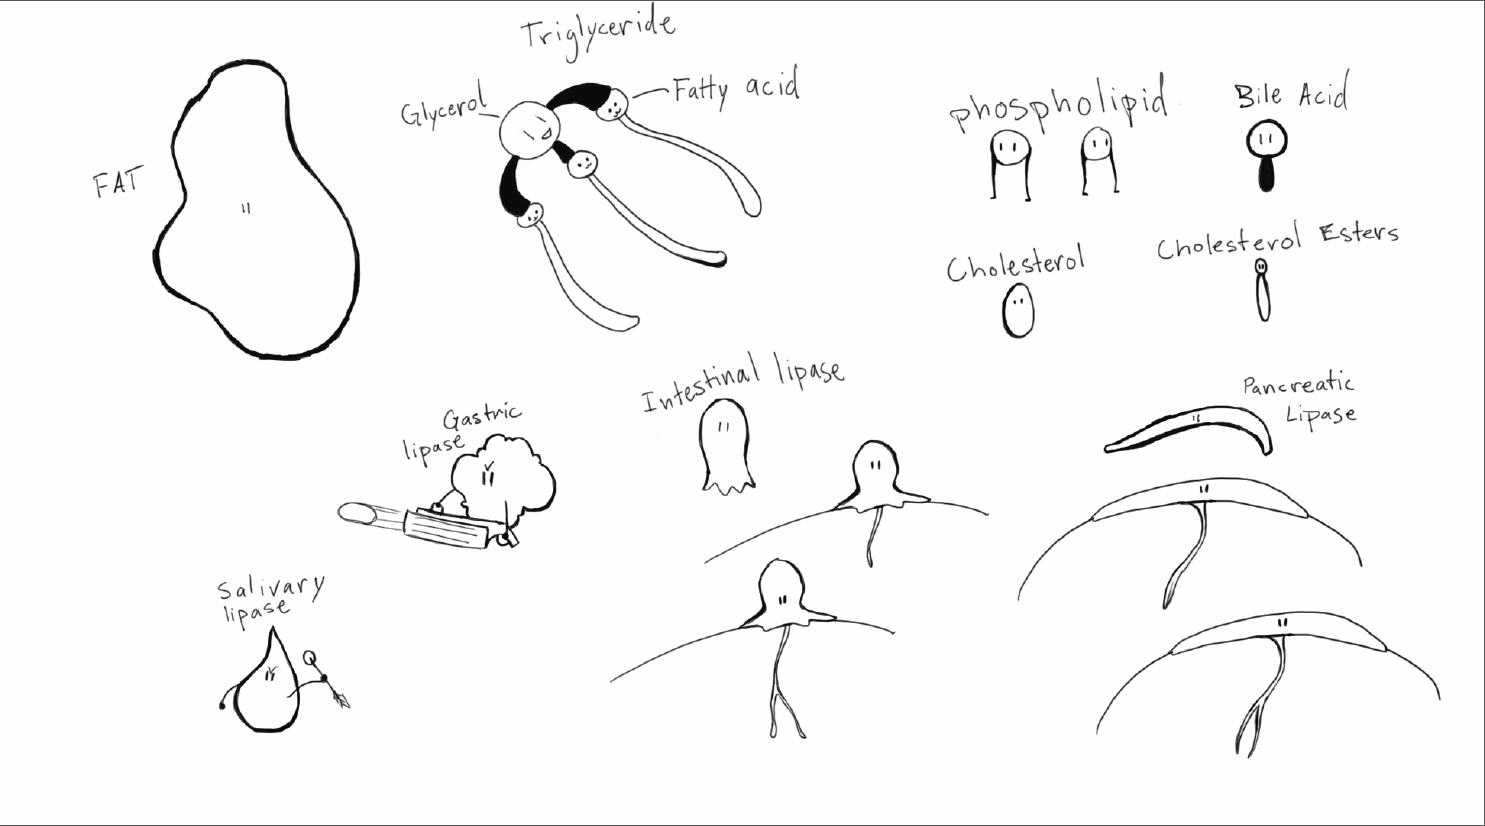 A character model sheet for the lipid digestion characters